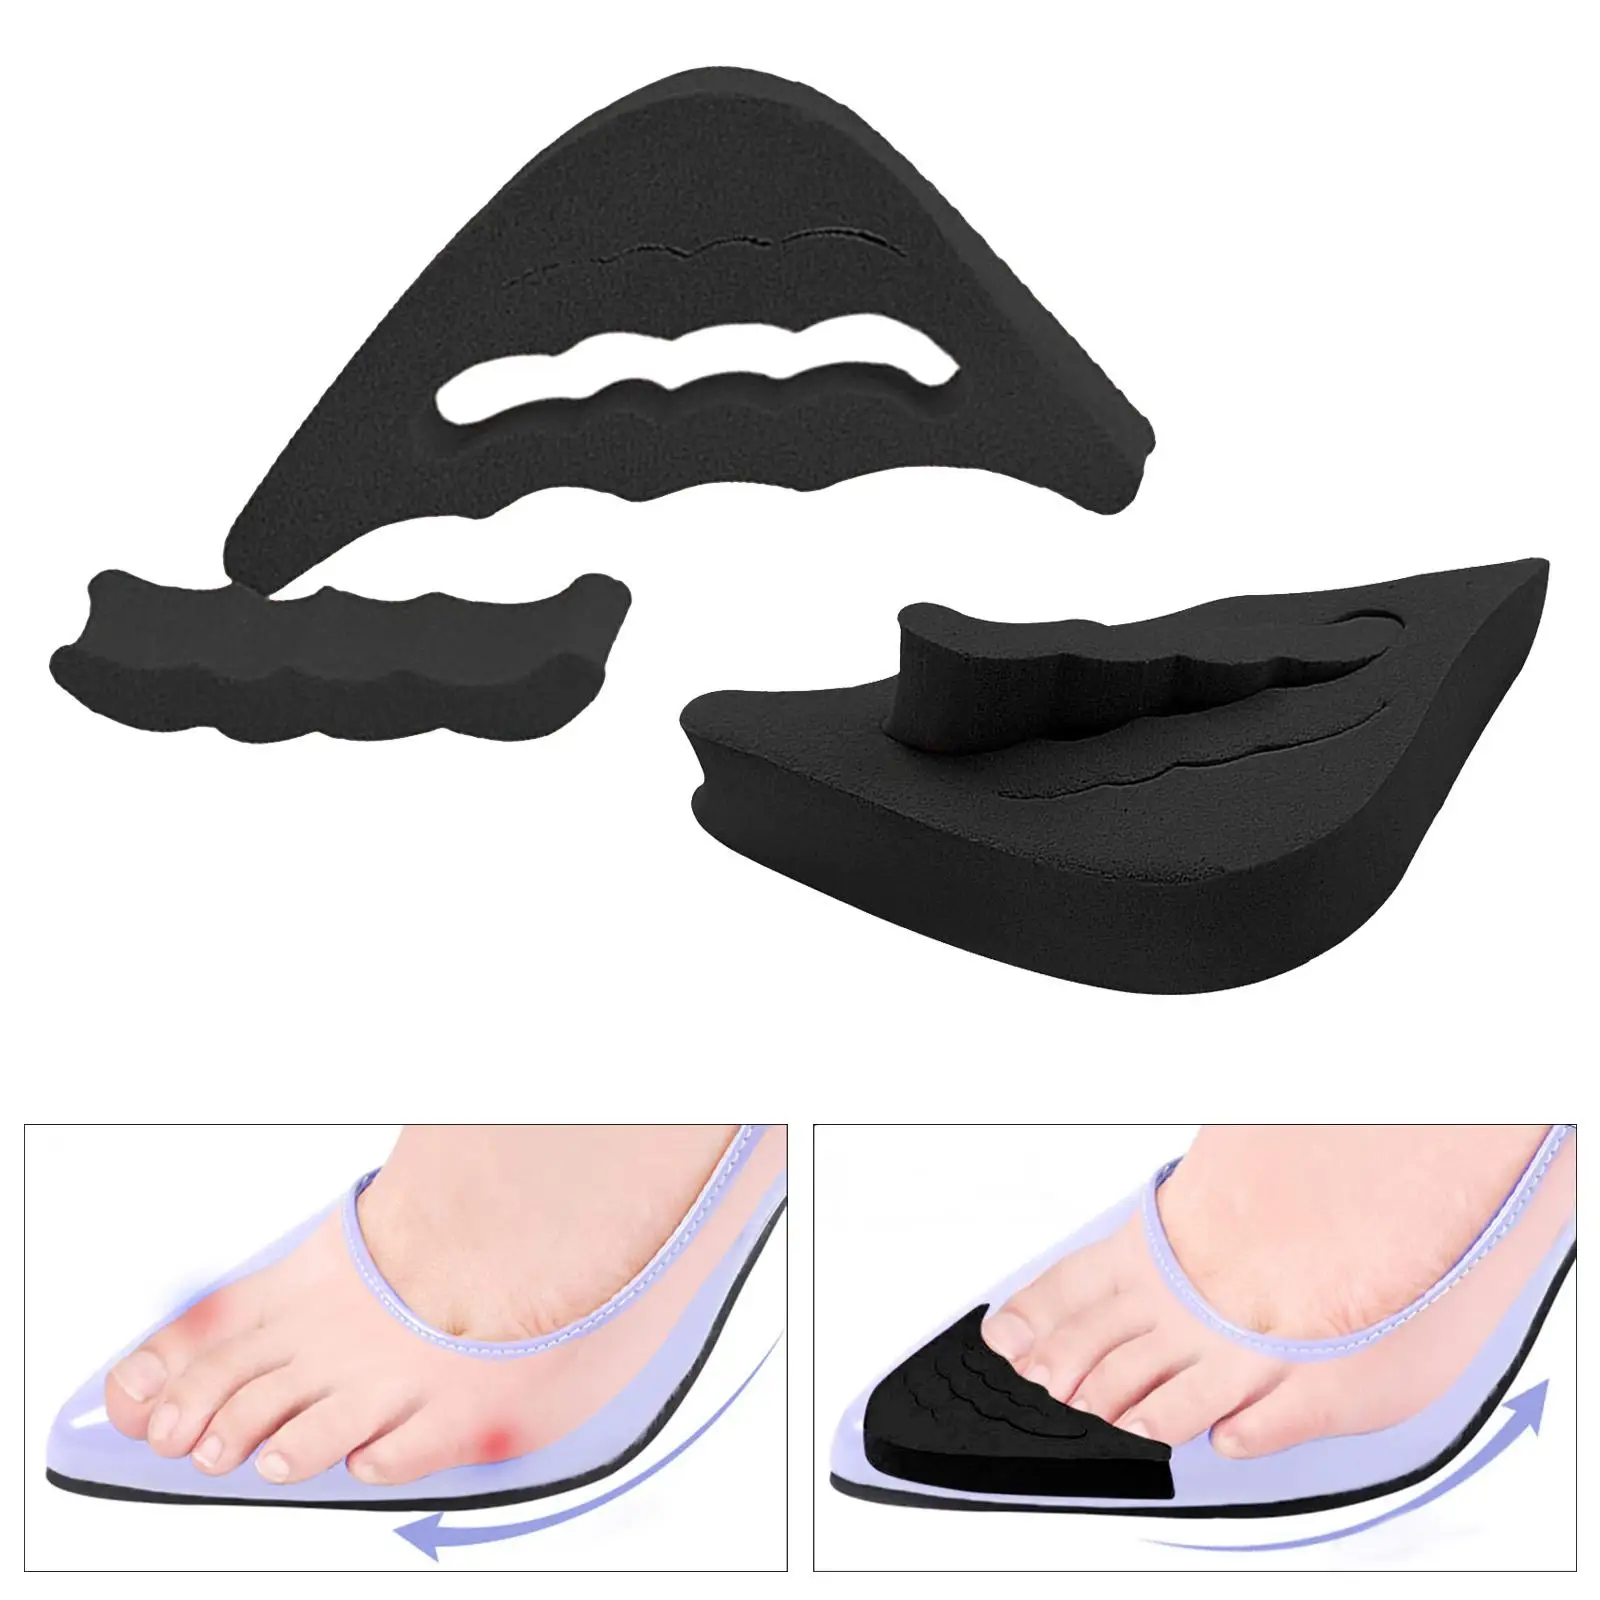 Toe Filler Inserts Pad Reusable Durable Adjustable Practical Breathable Reusable Insoles for Sports Camping Hiking Fishing Flats